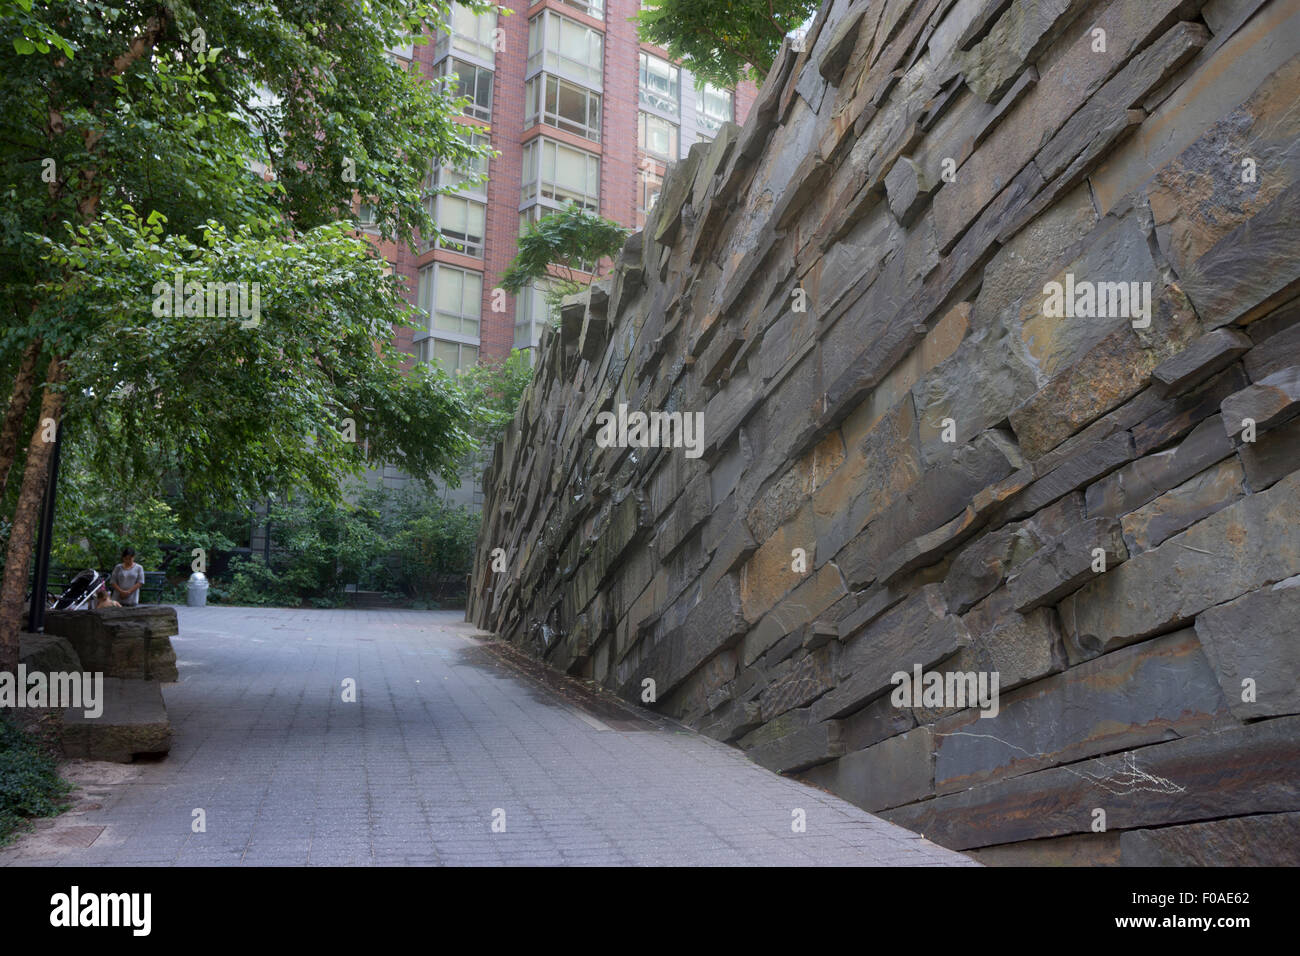 Teardrop Park in Battery Park City was designed by landscape architect Michael Van Valkenberg and features an 'Ice Wall' artwork Stock Photo